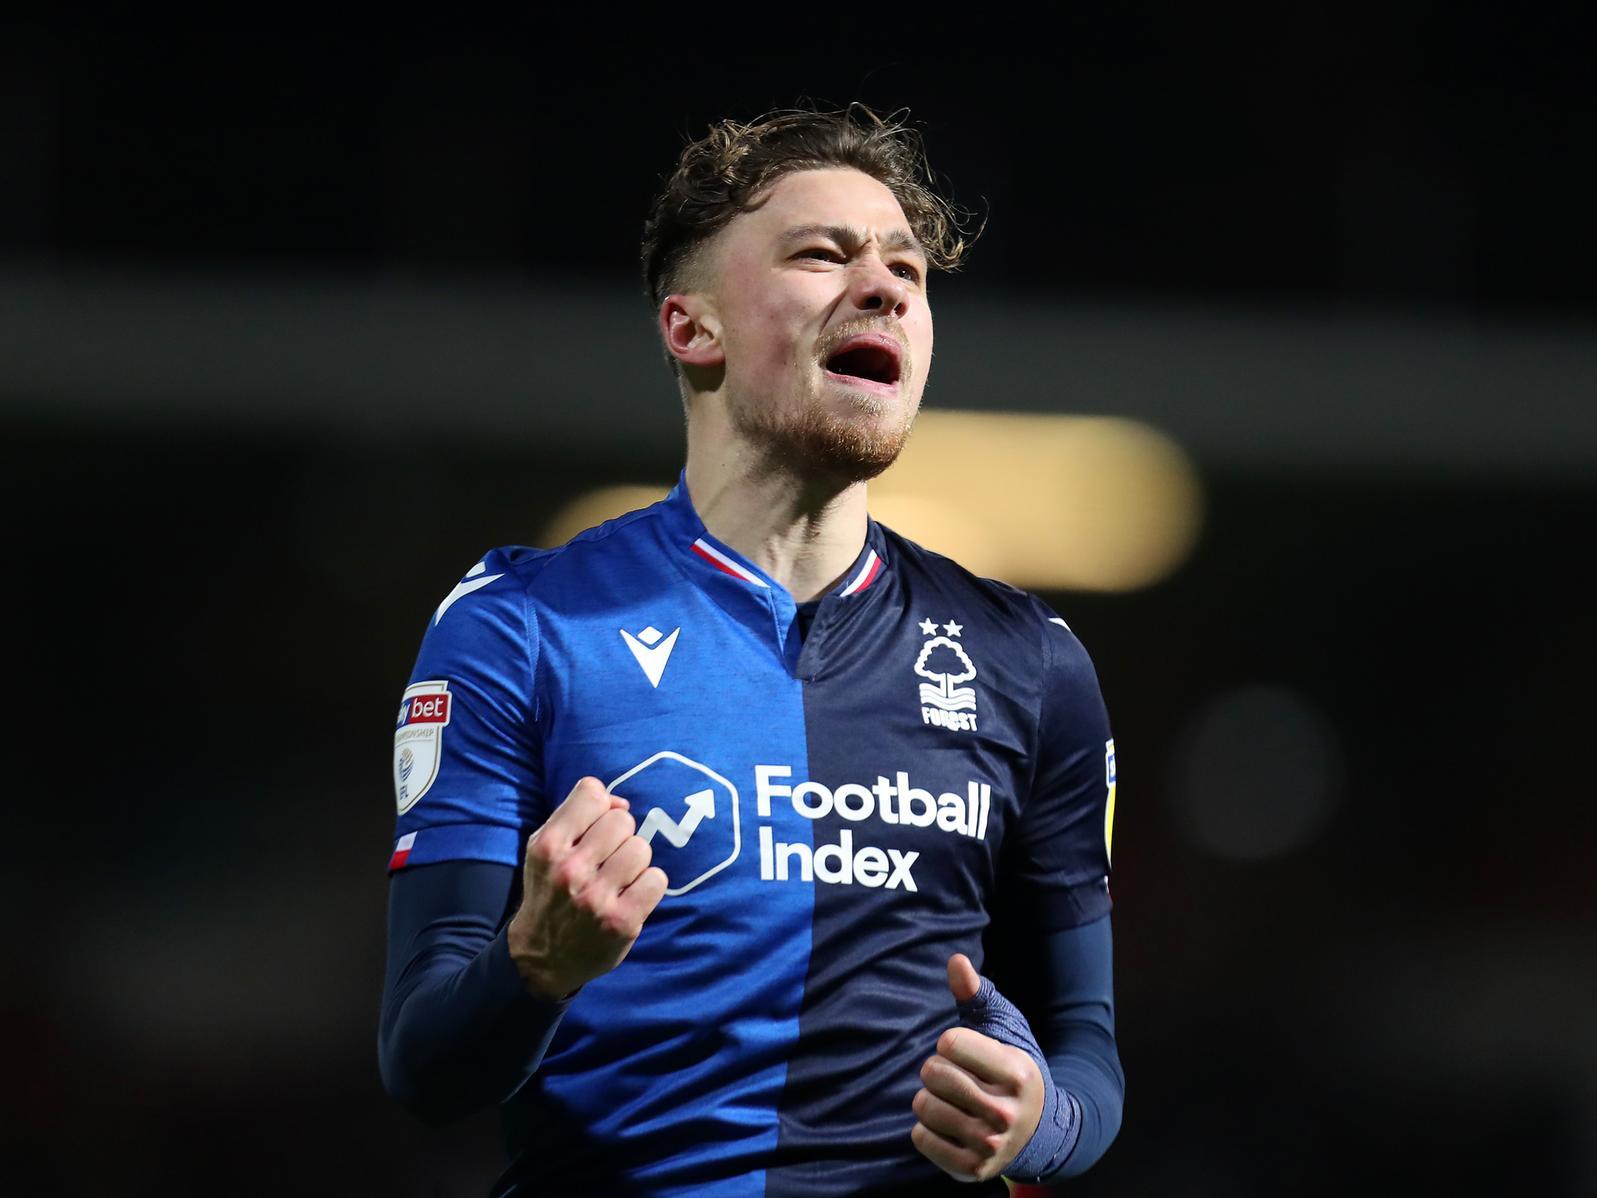 Nottingham Forest star Matty Cash says that he never thought of leaving the club, despite reported interest from AC Milan and West Ham United in the January window. (Nottingham Post)